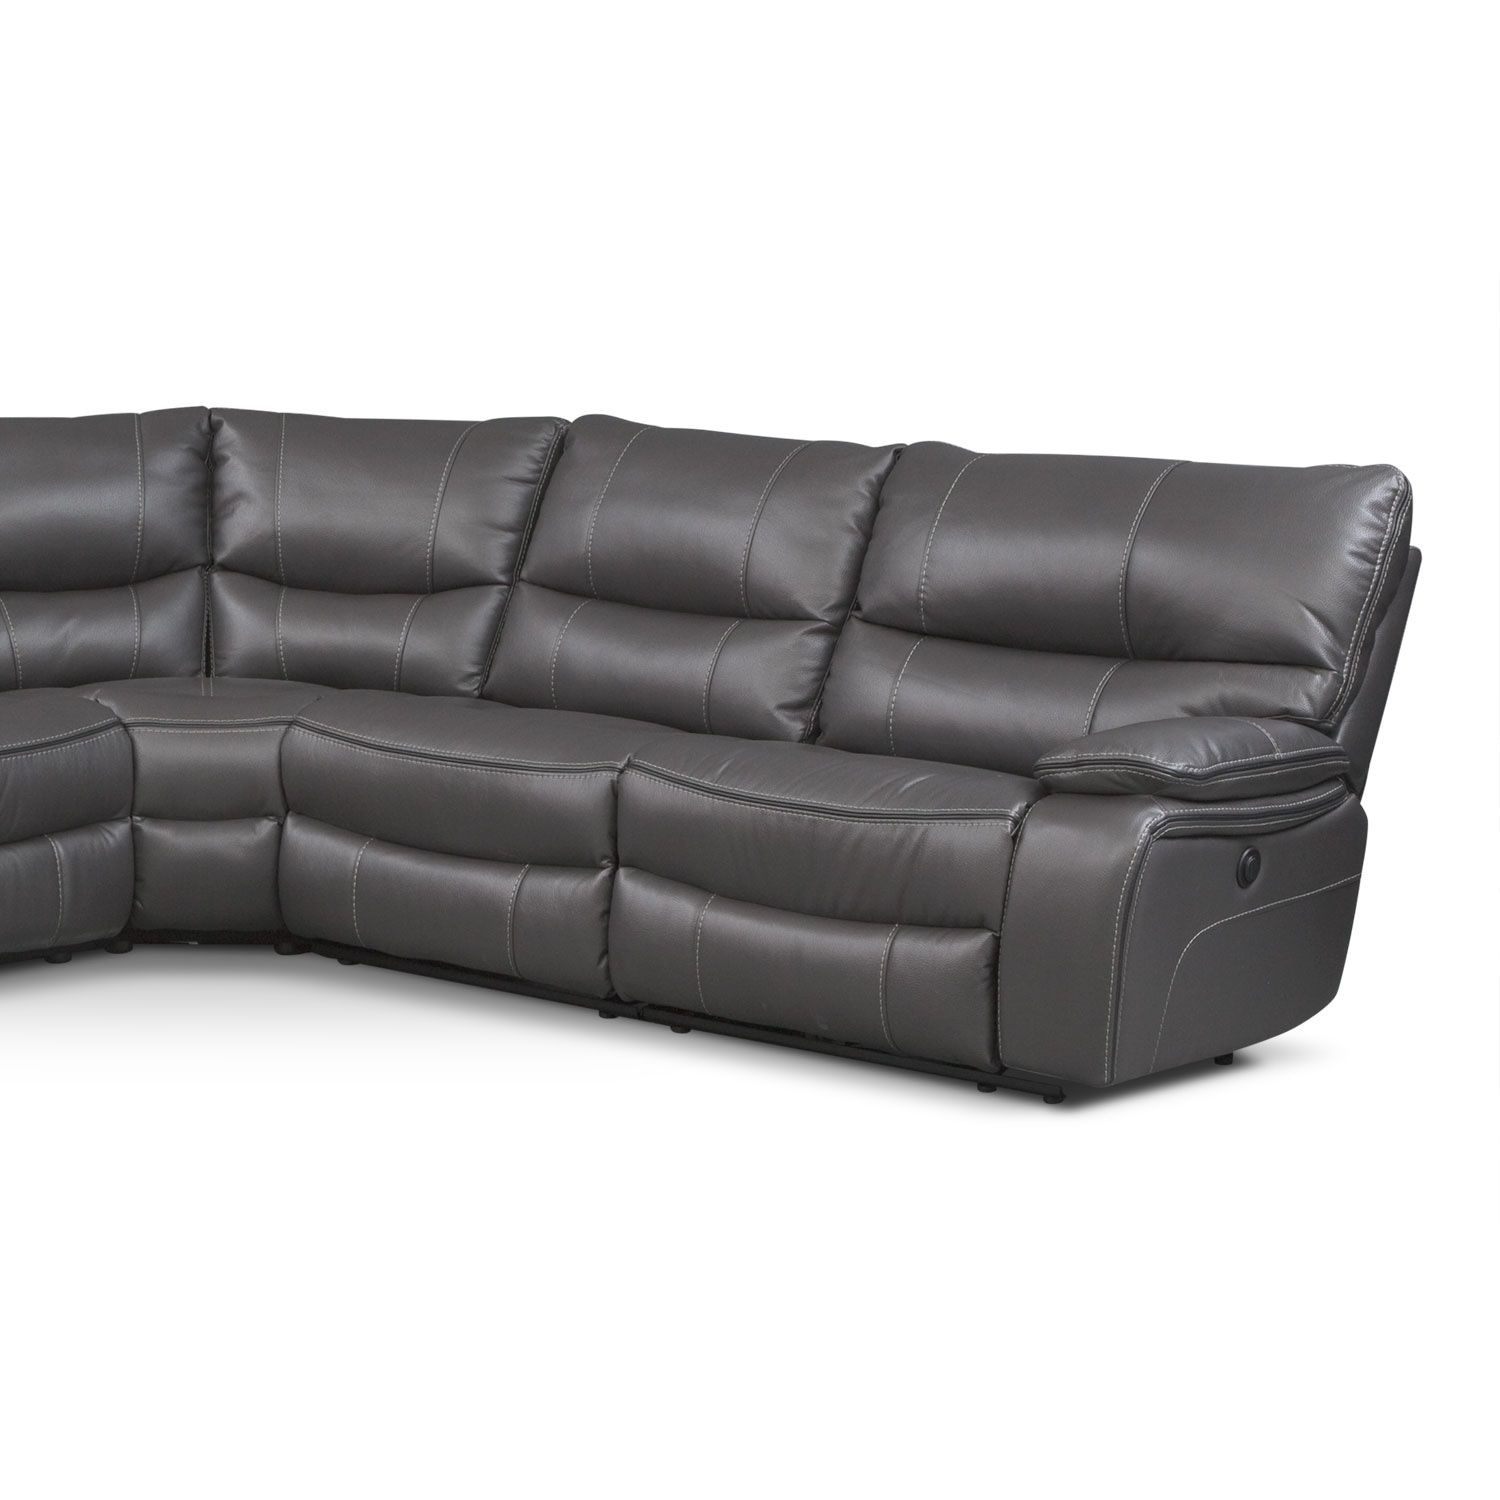 Orlando 6 Piece Power Reclining Sectional With 1 Stationary Chair Inside Kristen Silver Grey 6 Piece Power Reclining Sectionals (View 10 of 30)